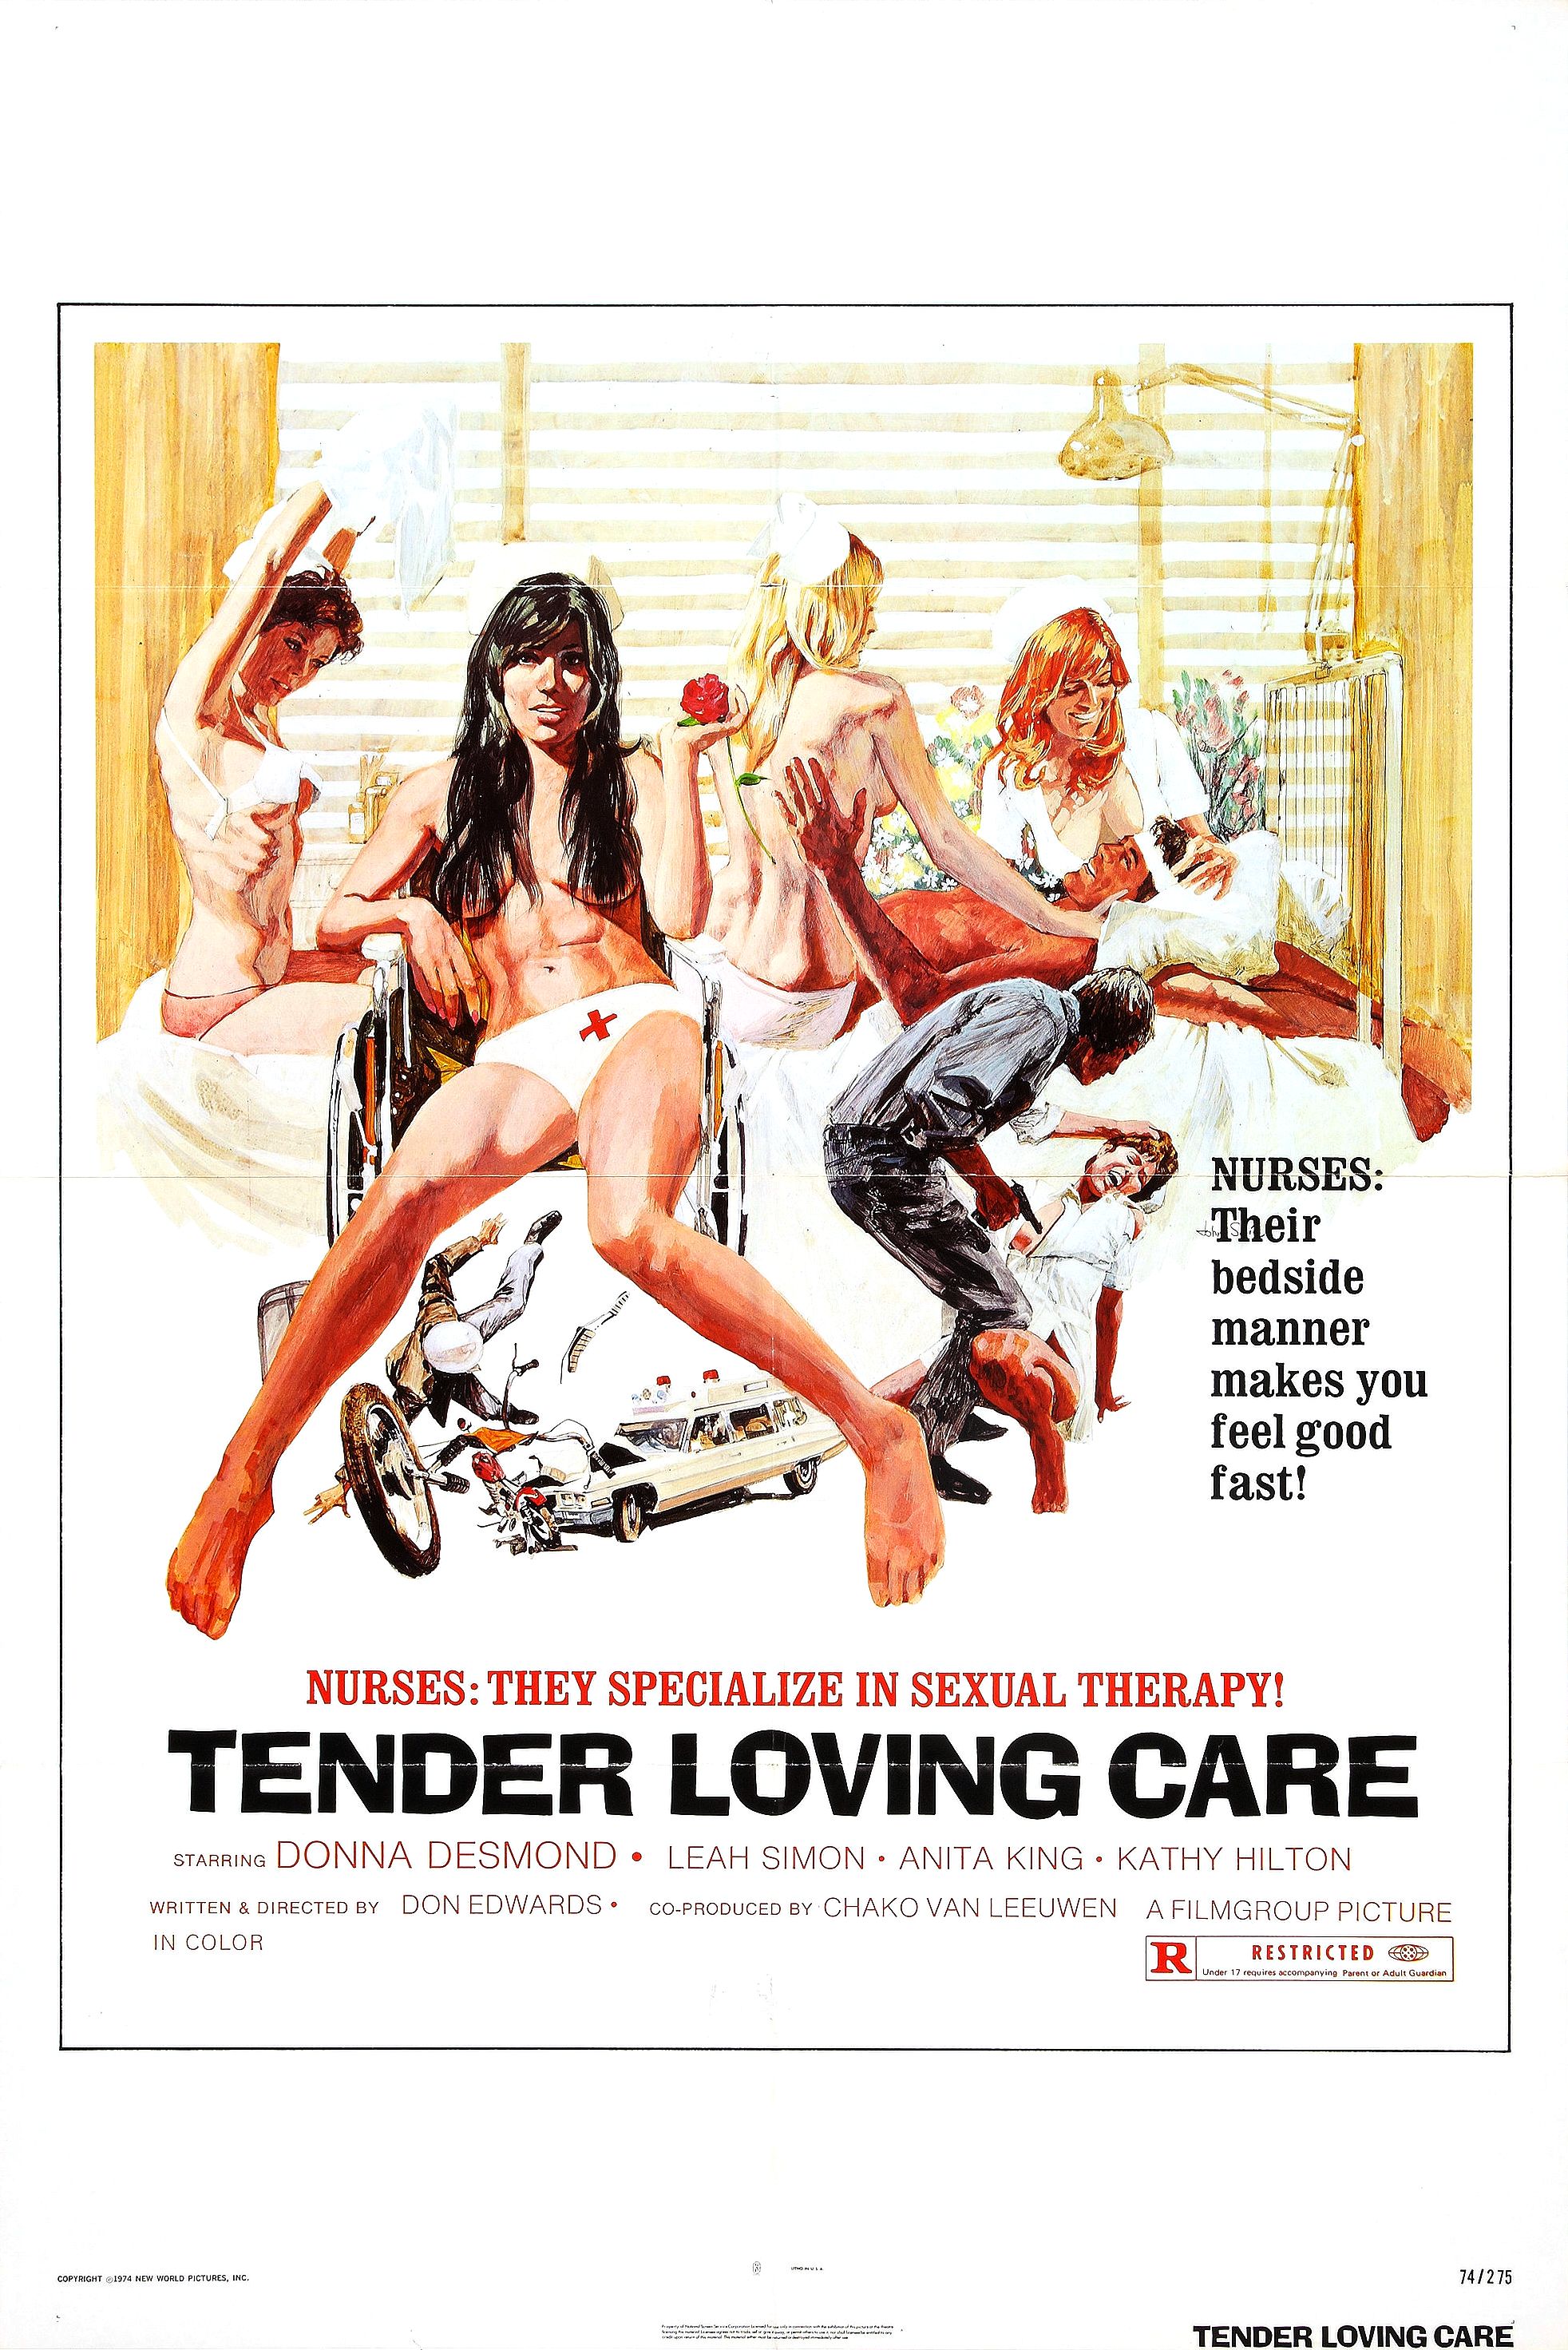 tender loving care 1973 - Nurses Their bedside manner makes you feel good fast! Nurses They Specialize In Sexual Therapy! Tender Loving Care W Donna Desmond Leah Simon Anita King Kathy Hilton Donowands C Hanovan Leeuwen Atilmgroupsotus Tender Loving Care